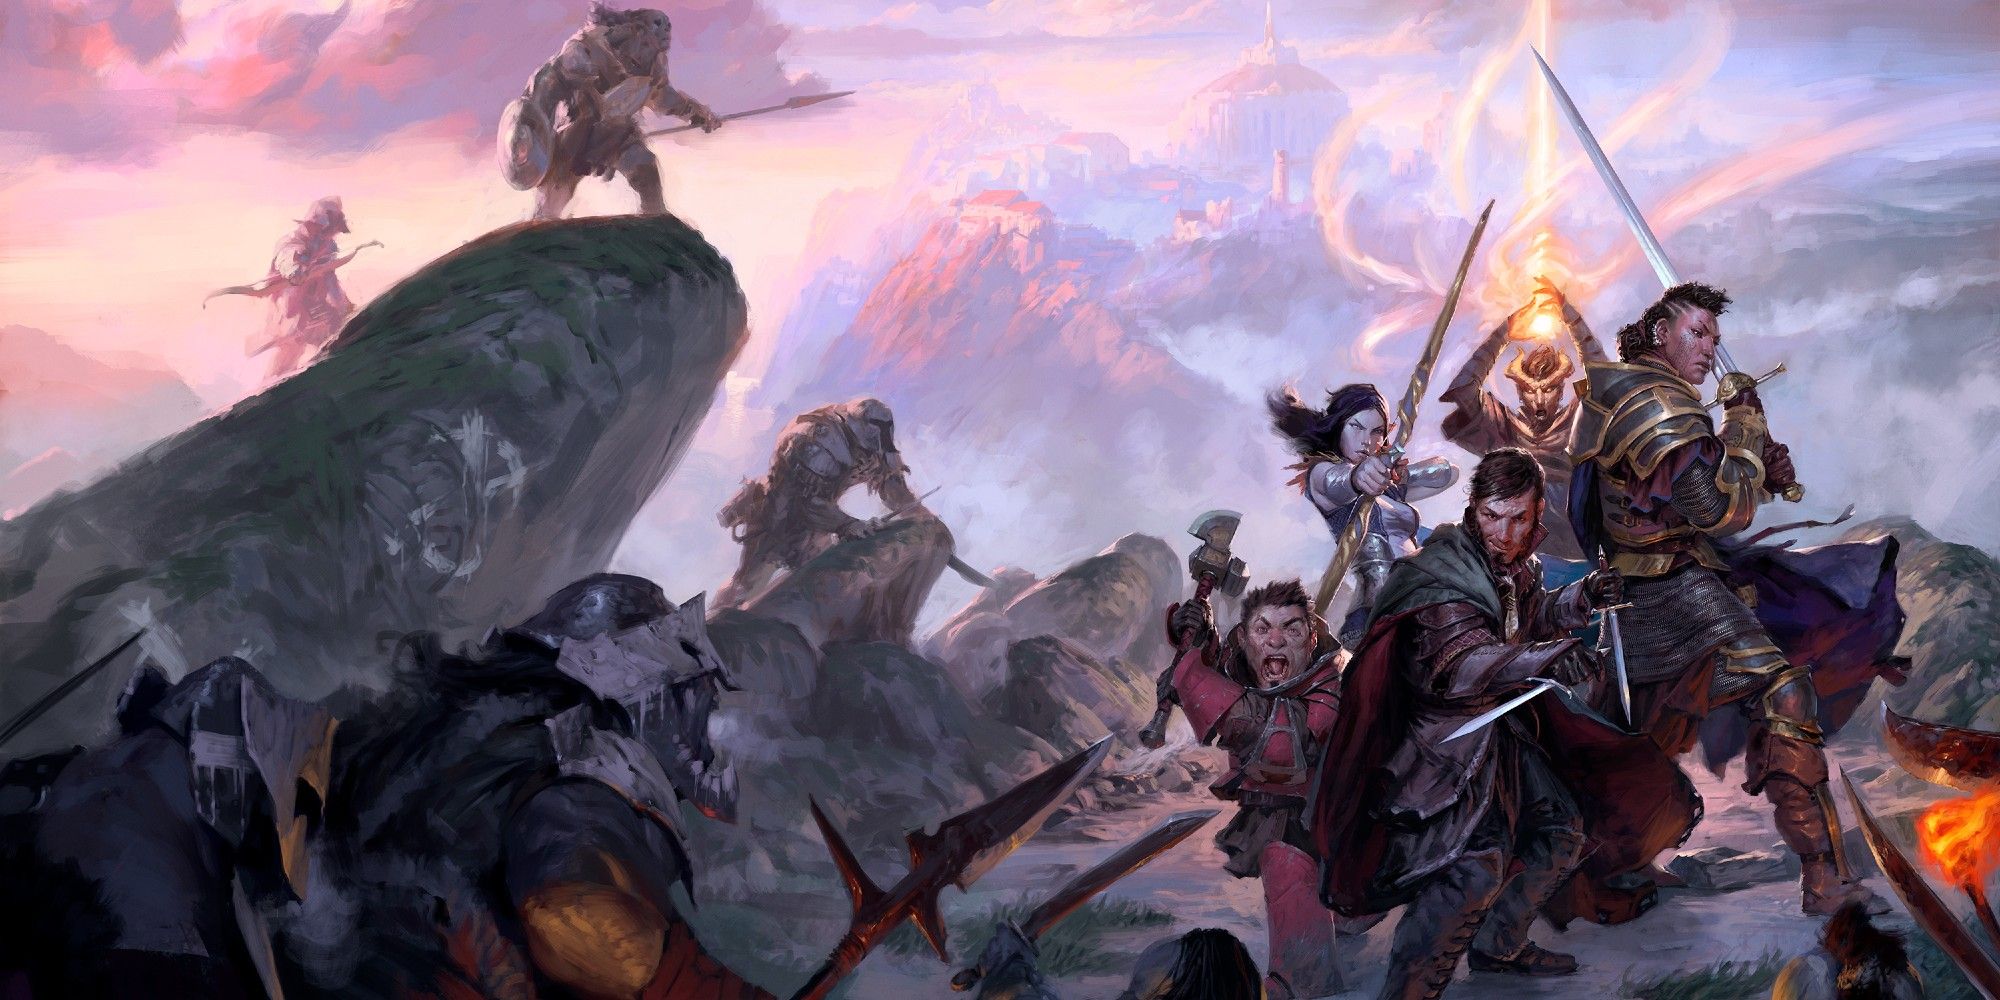 Sword Coast Adventurer's Guide Cover Art with the party in a battlefield preparing for battle